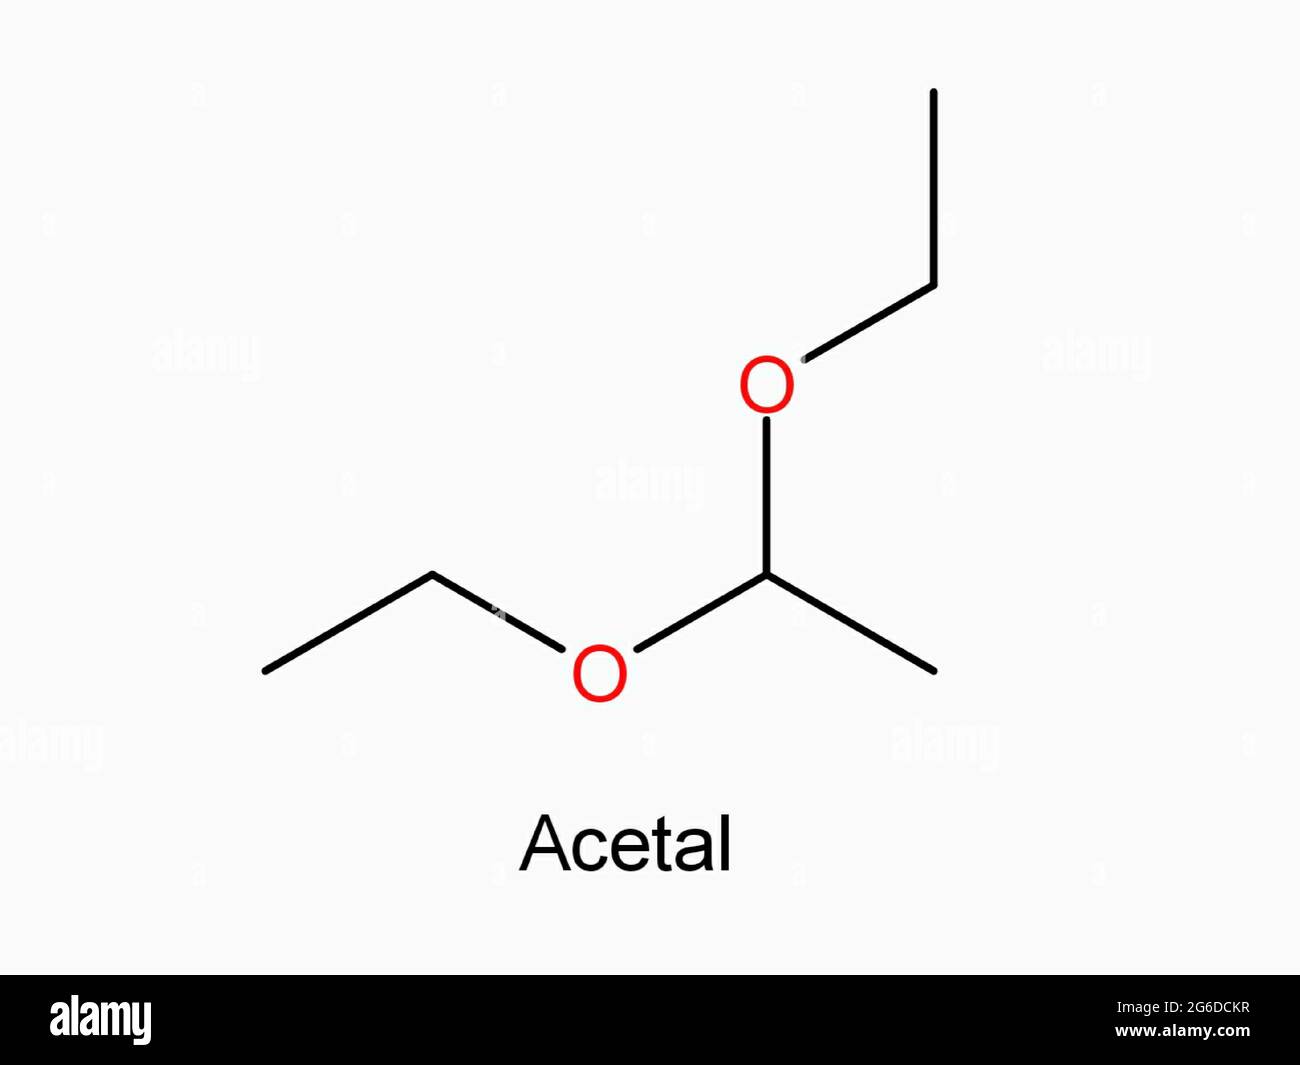 acetal functional group chemical formula isolated on white background molecule atom organic chemistry molecular structure Stock Photo